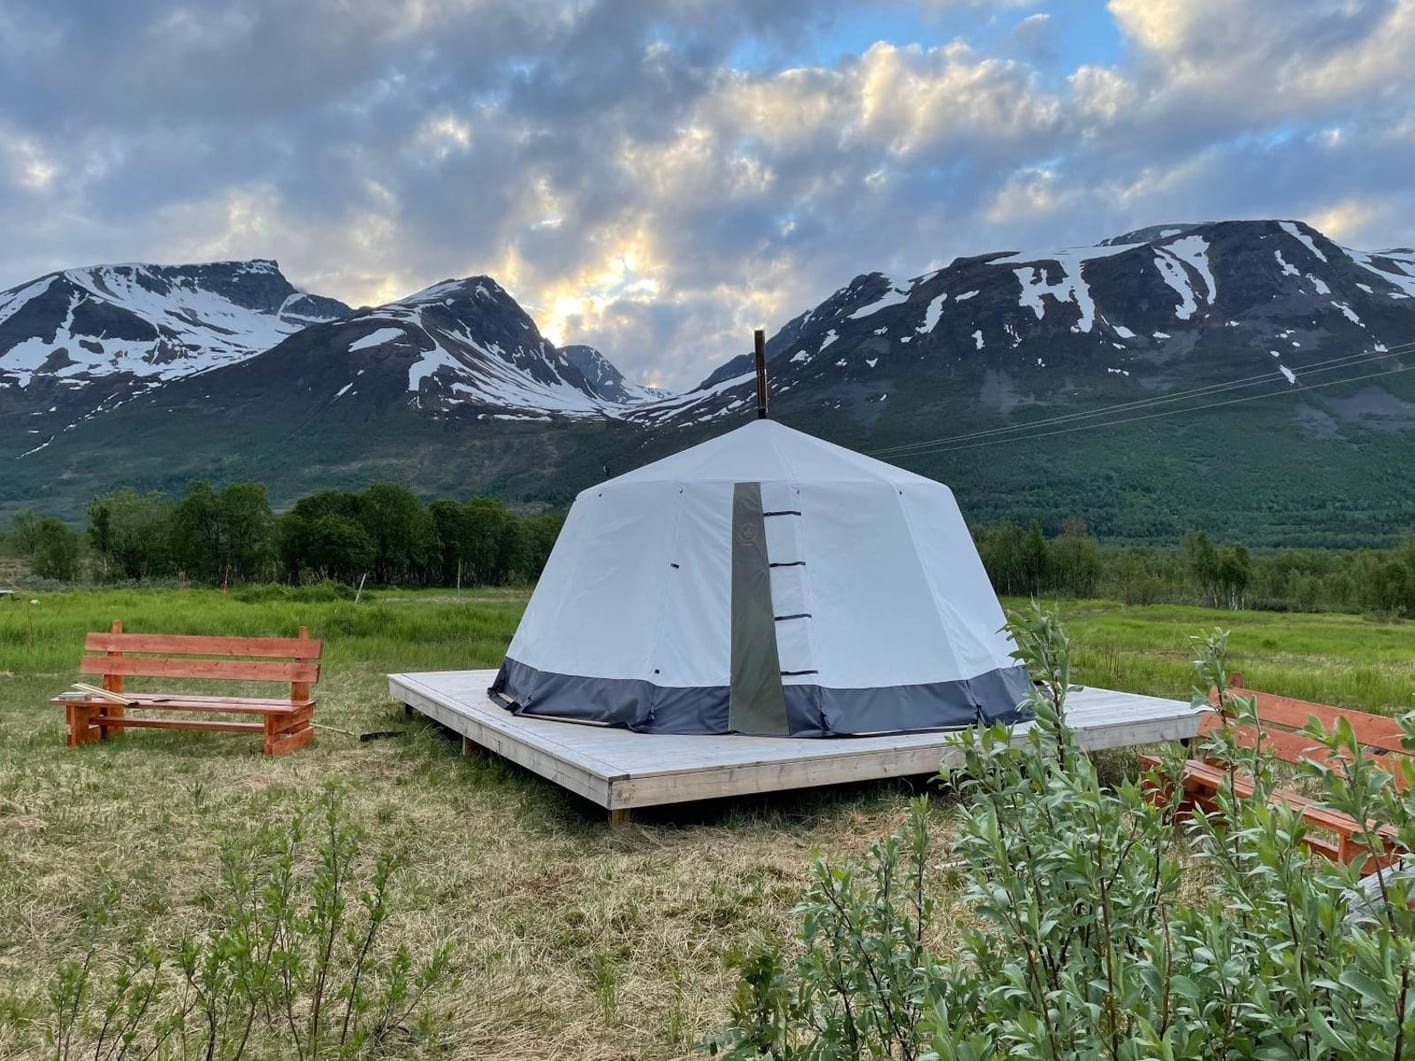 Camping in the Arctic wilderness, one of the best Tromso summer activities for exploring the area